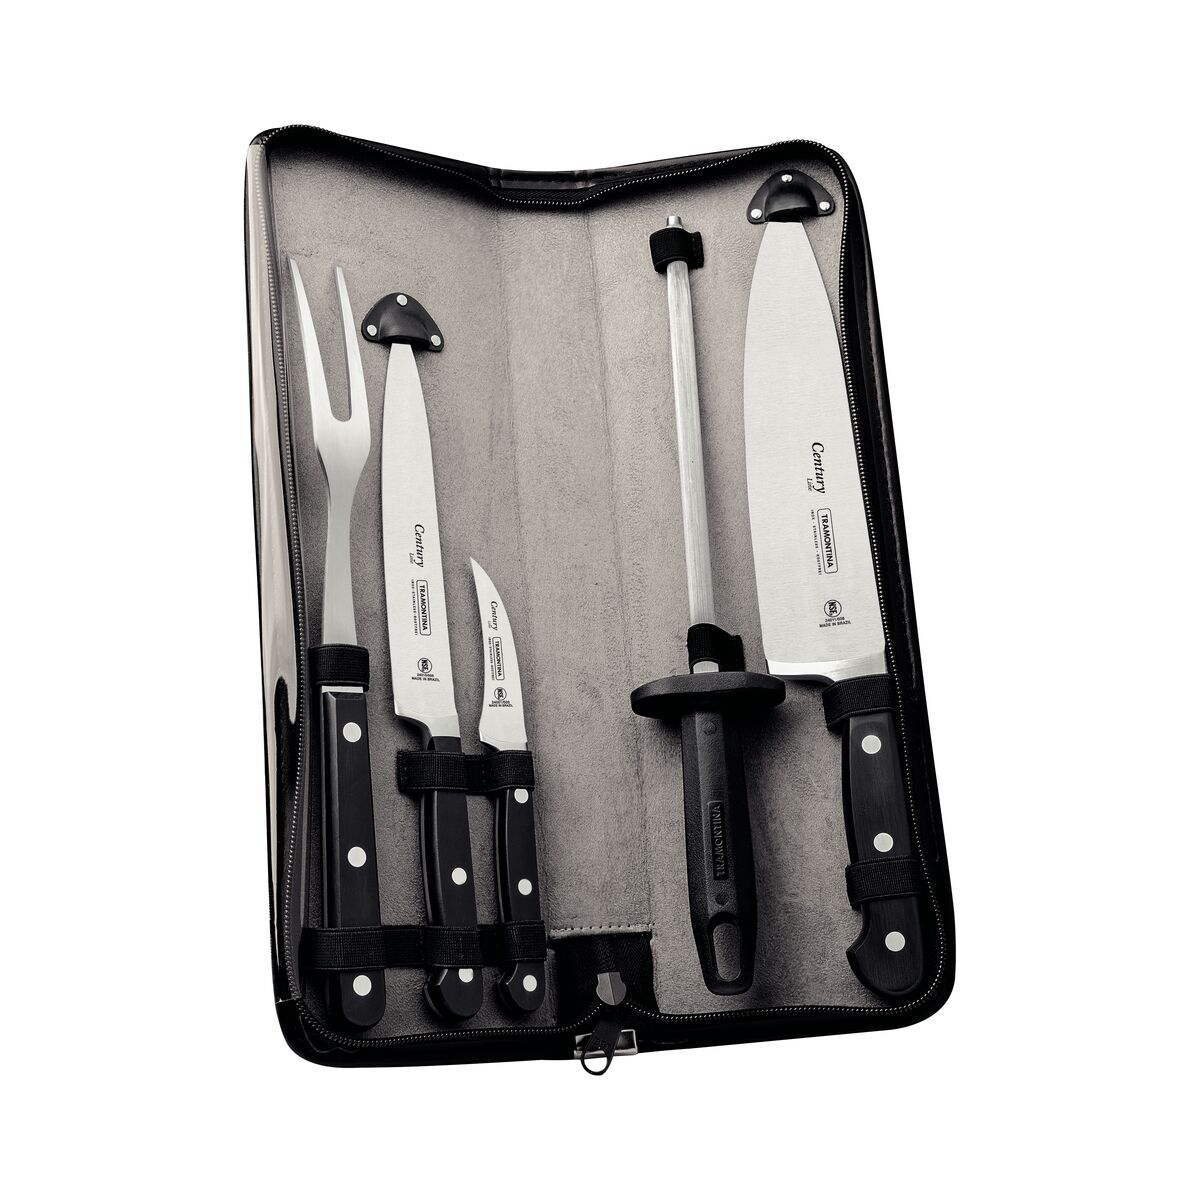 Tramontina Century knife set with stainless steel blades, polycarbonate and fiberglass handles, and case, 6pc set